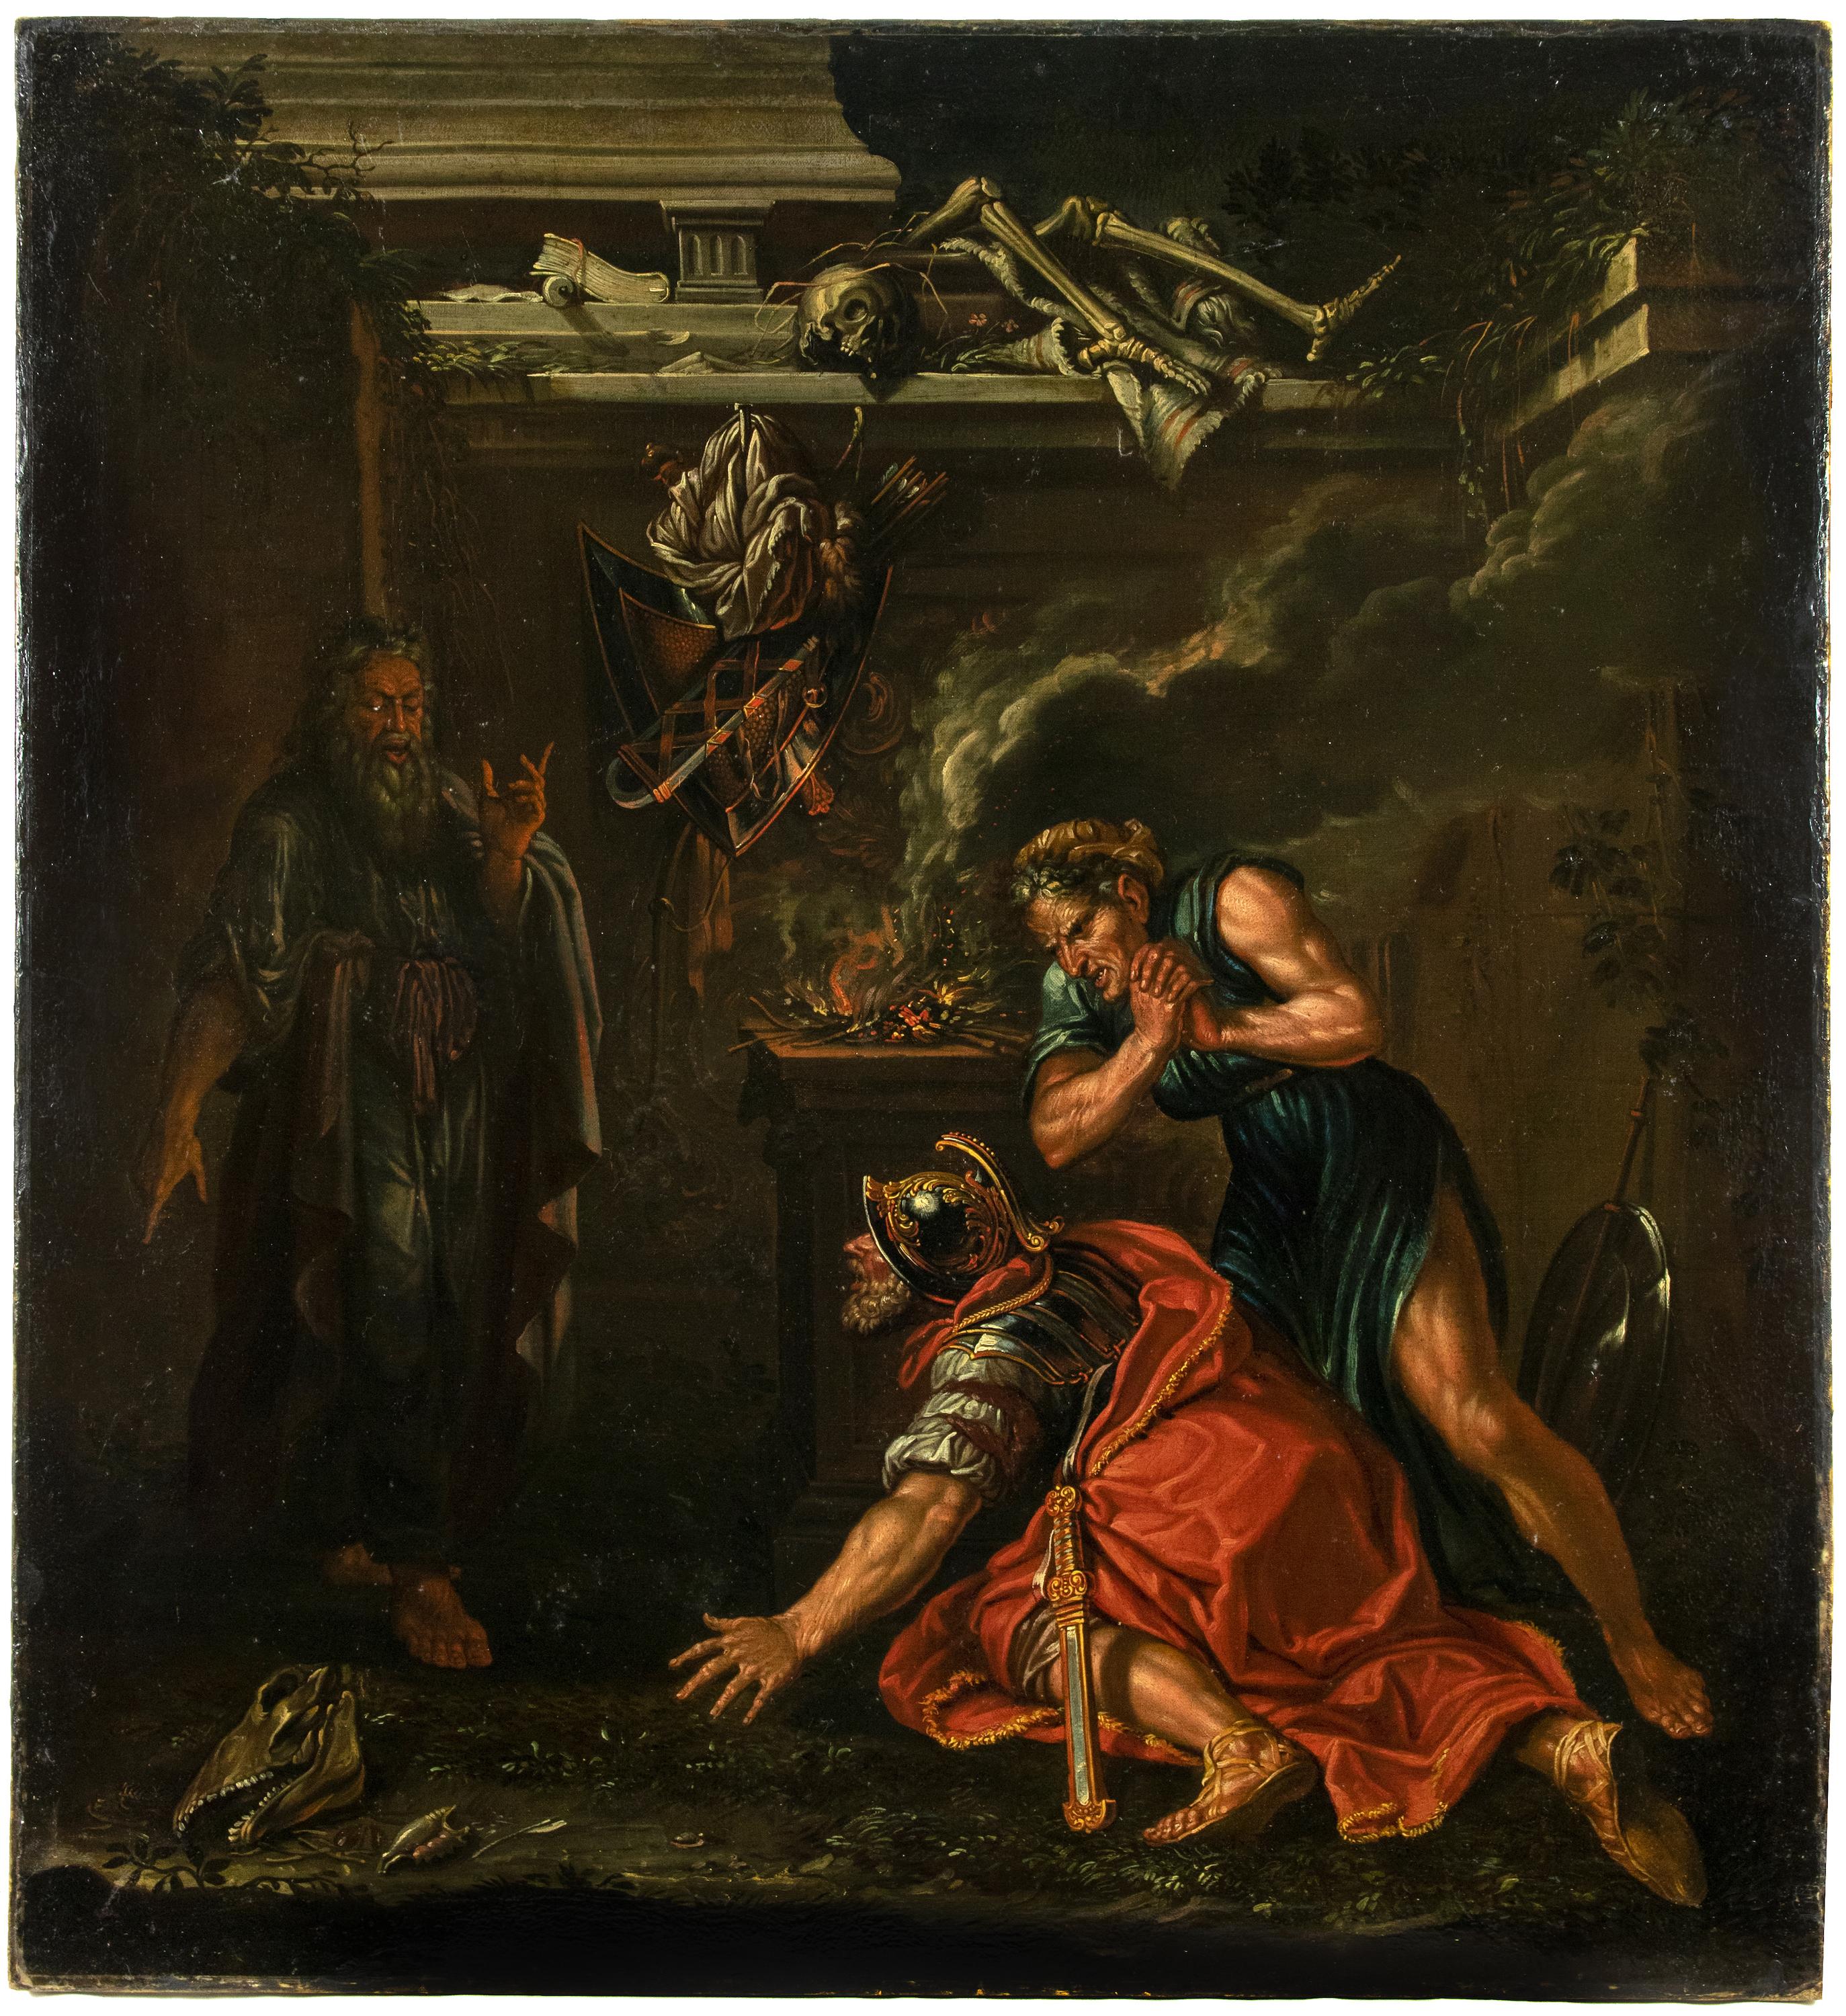 The Witch of Endor - Oil Paint - End of 18th Century